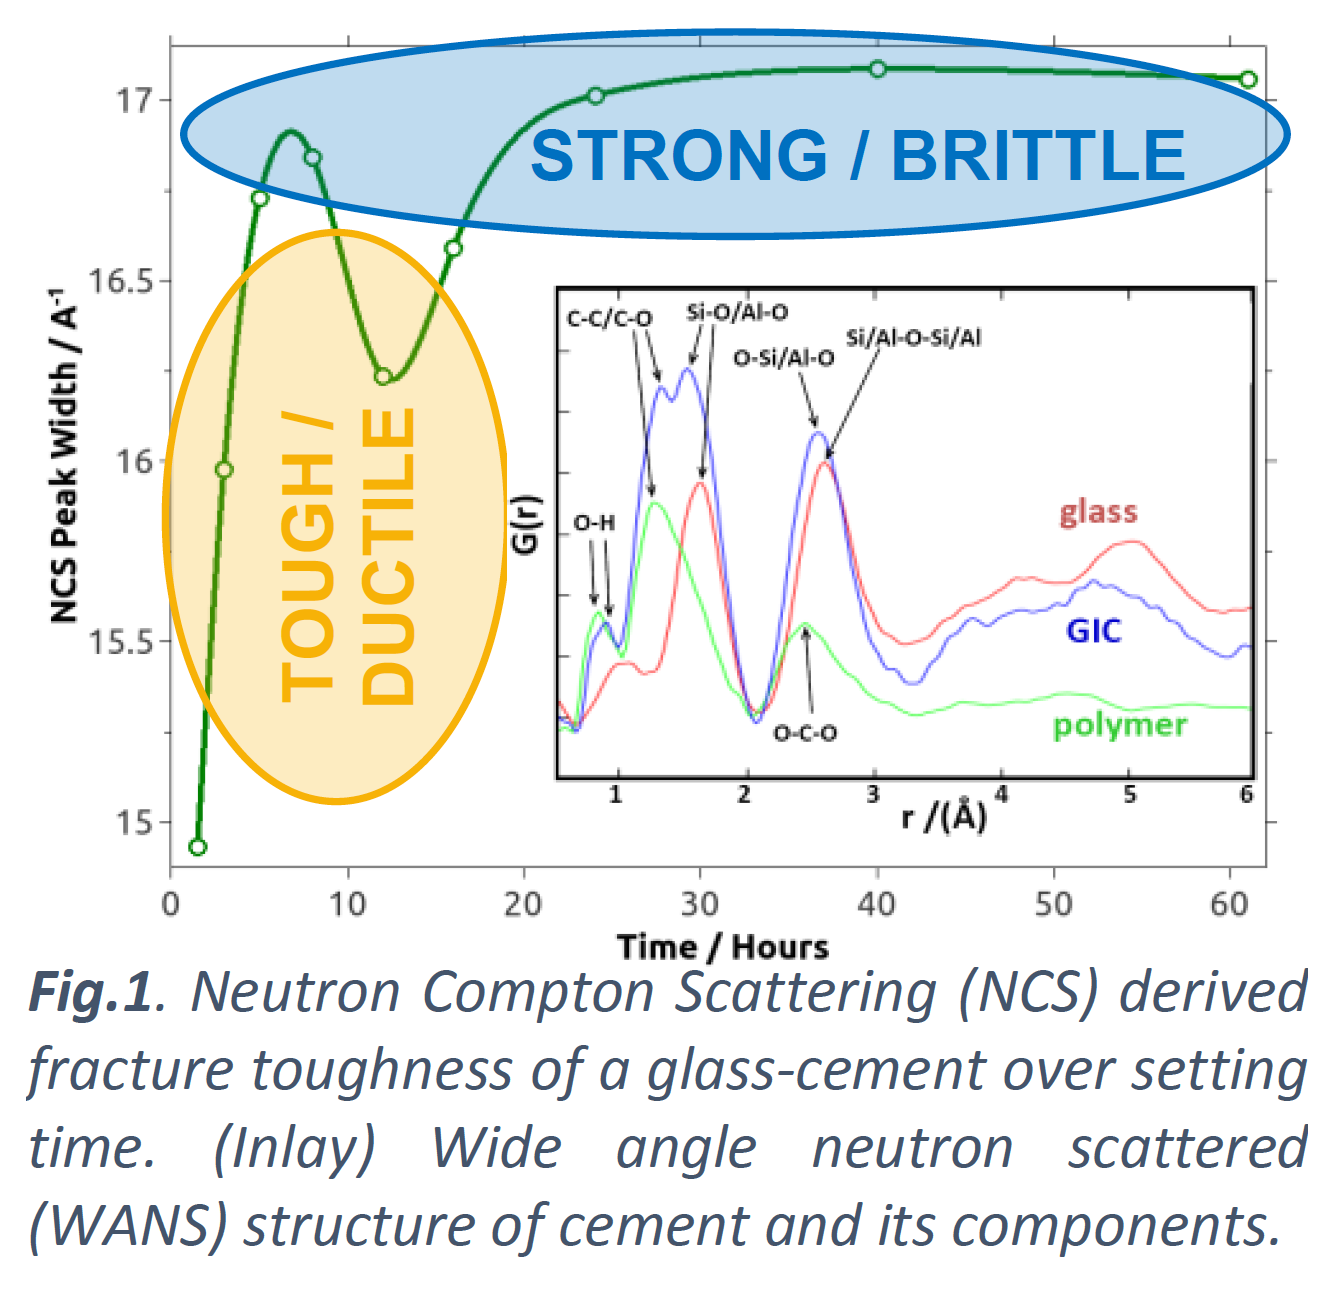 Neutron Compton Scattering (NCS) derived fracture toughness of a glass-cement over setting time. (Inlay) Wide angle neutron scattered (WANS) structure of cement and its components.